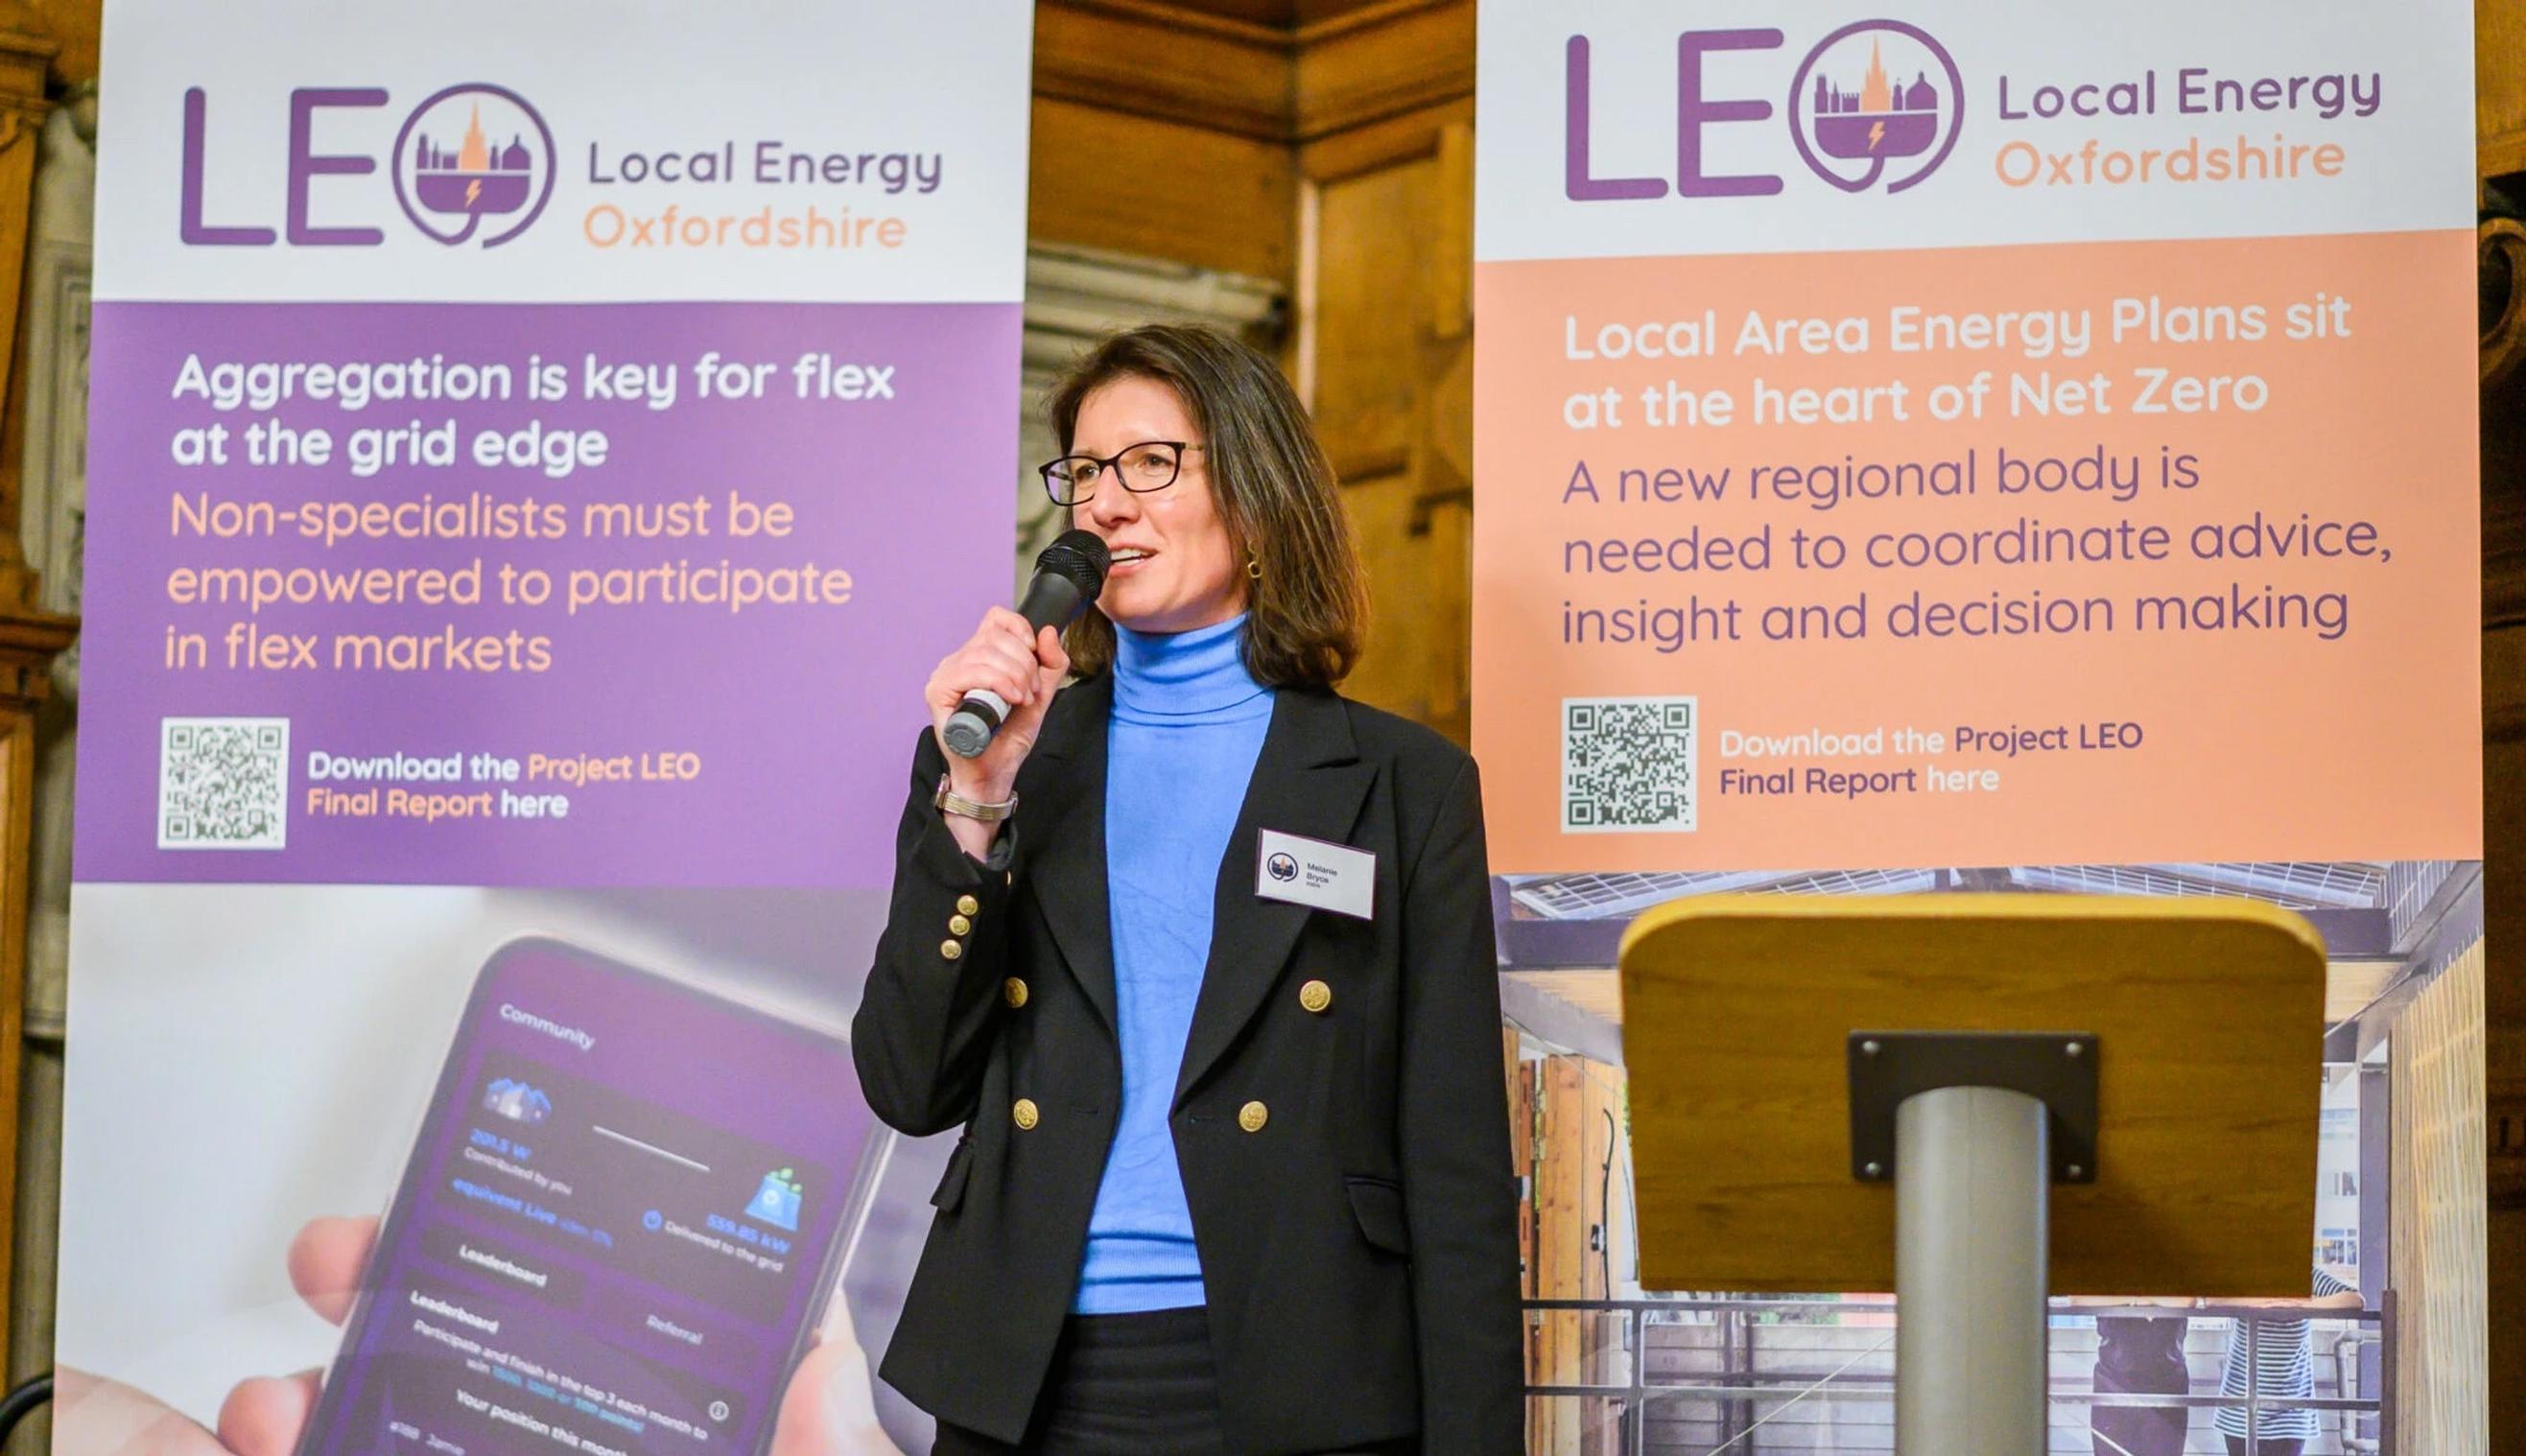 Project LEO underlines importance of community in local energy planning